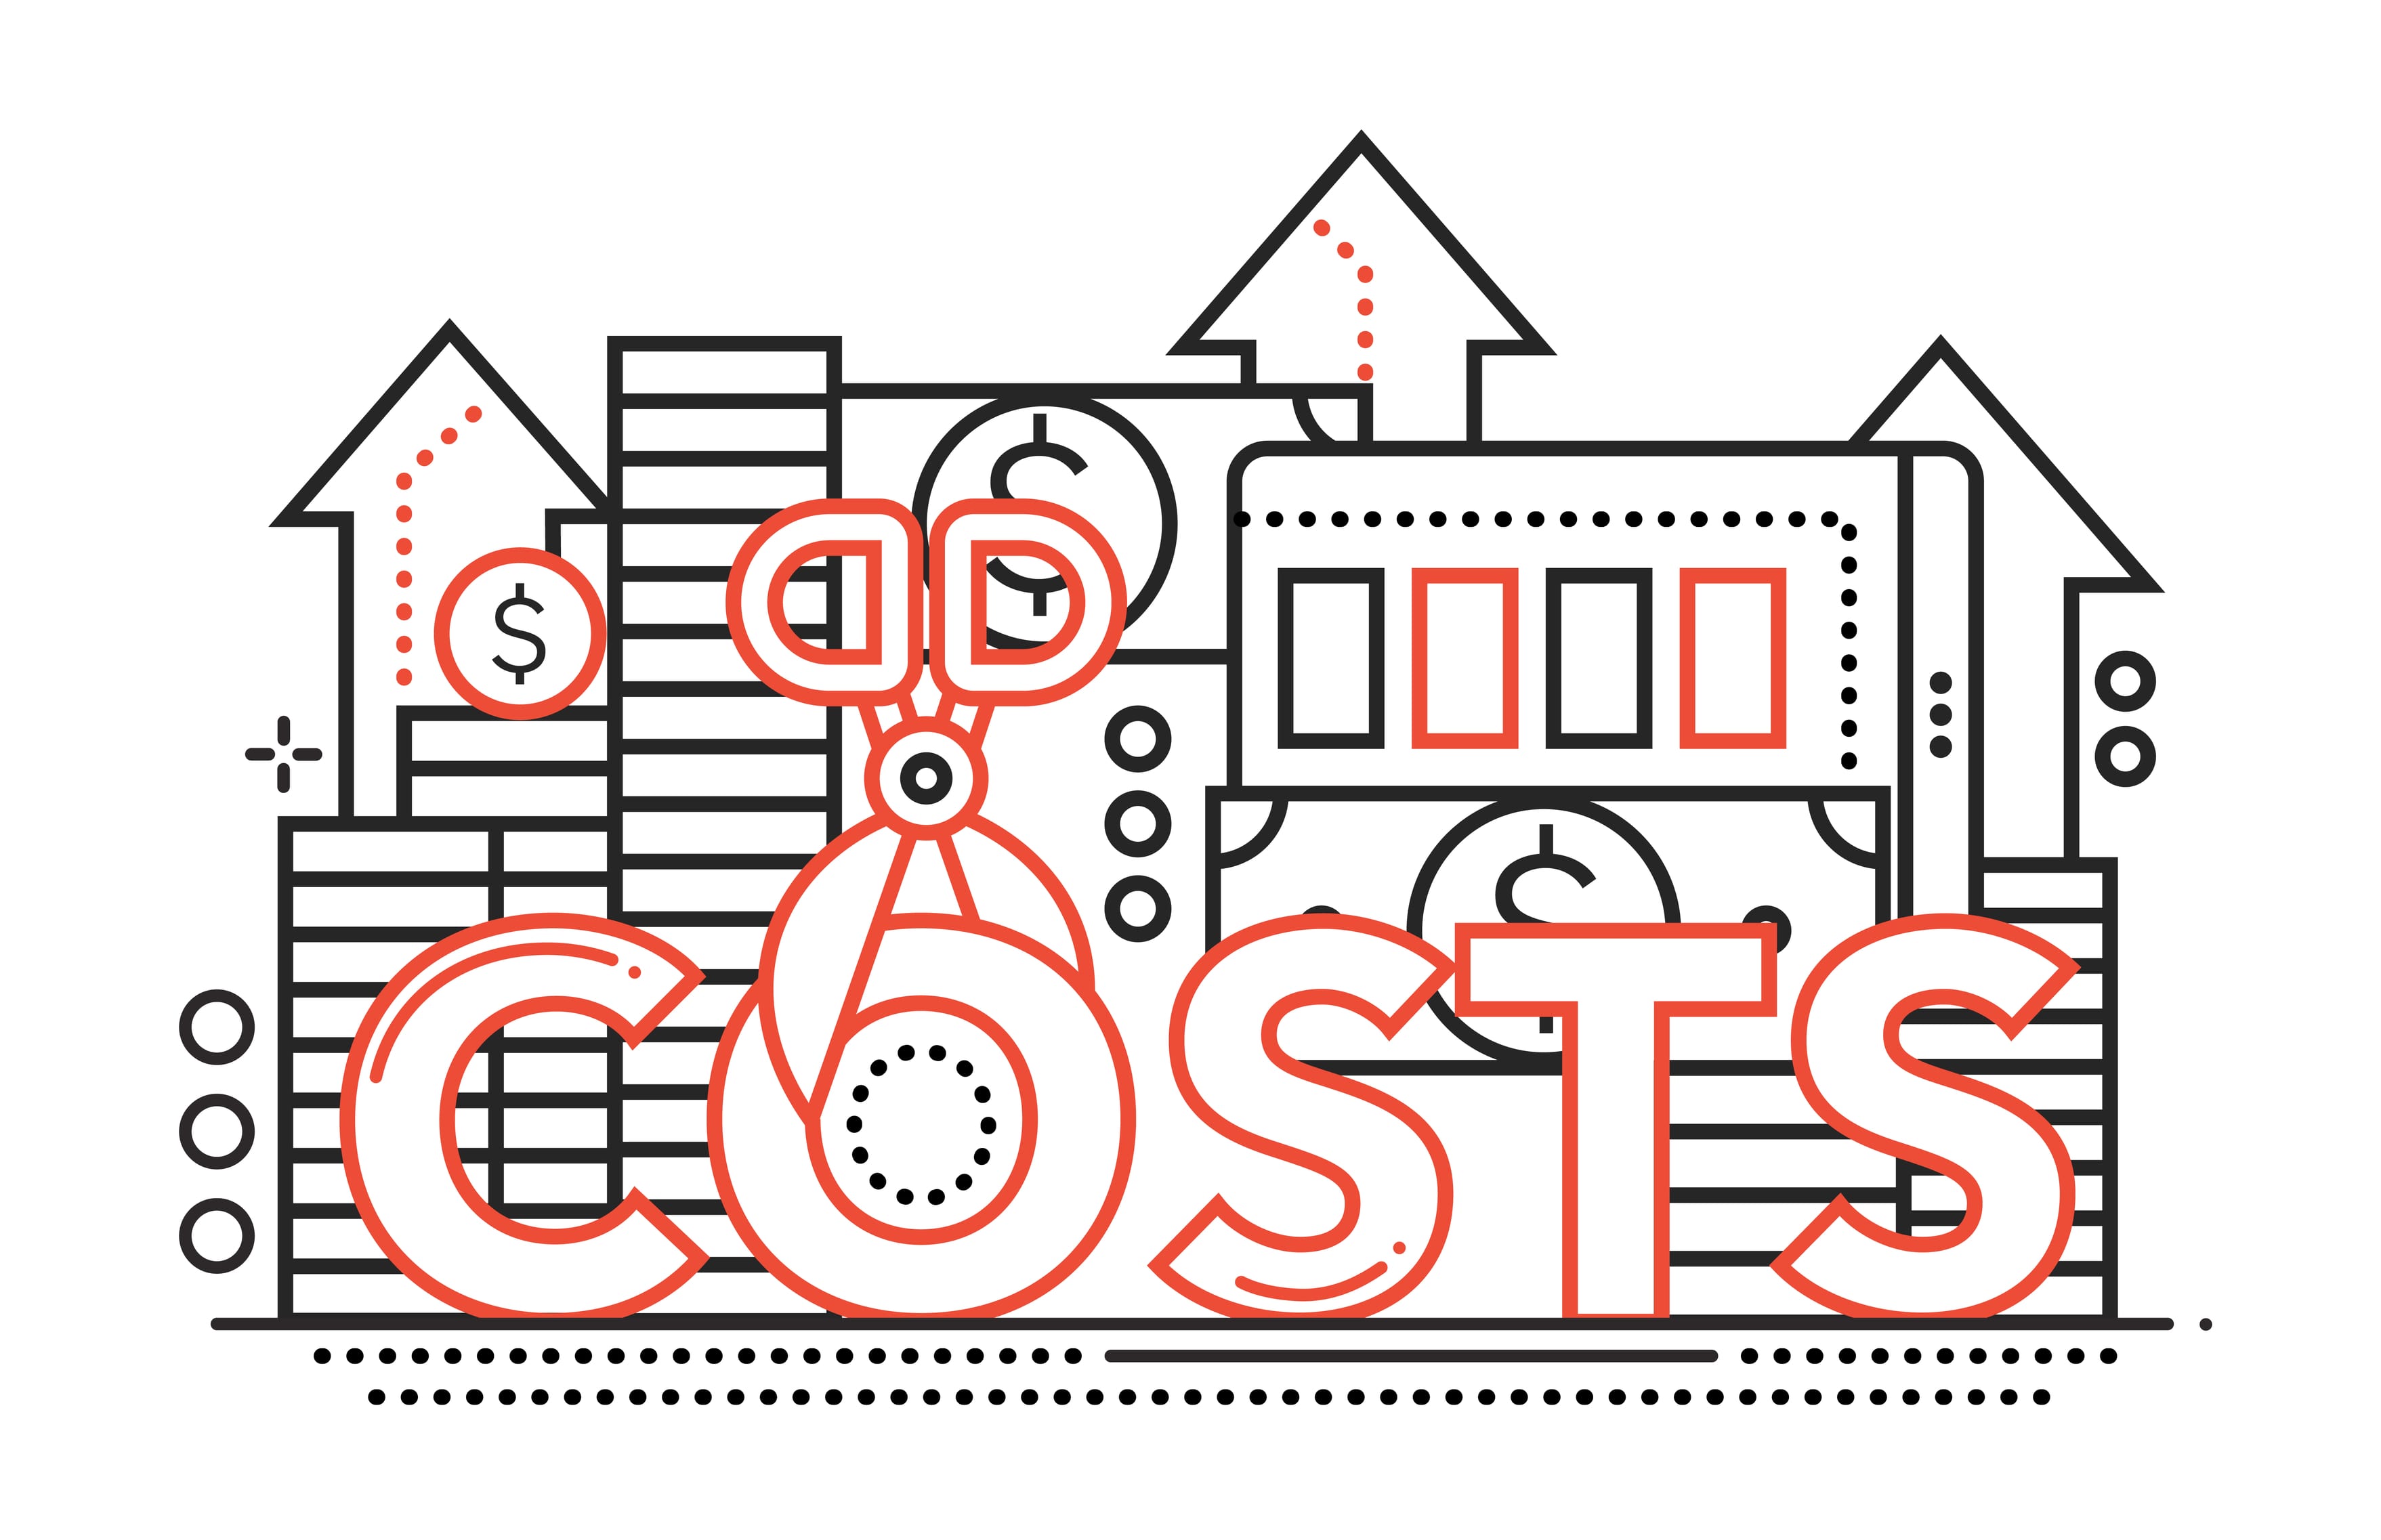 7 Ways to Cut Your Business Costs